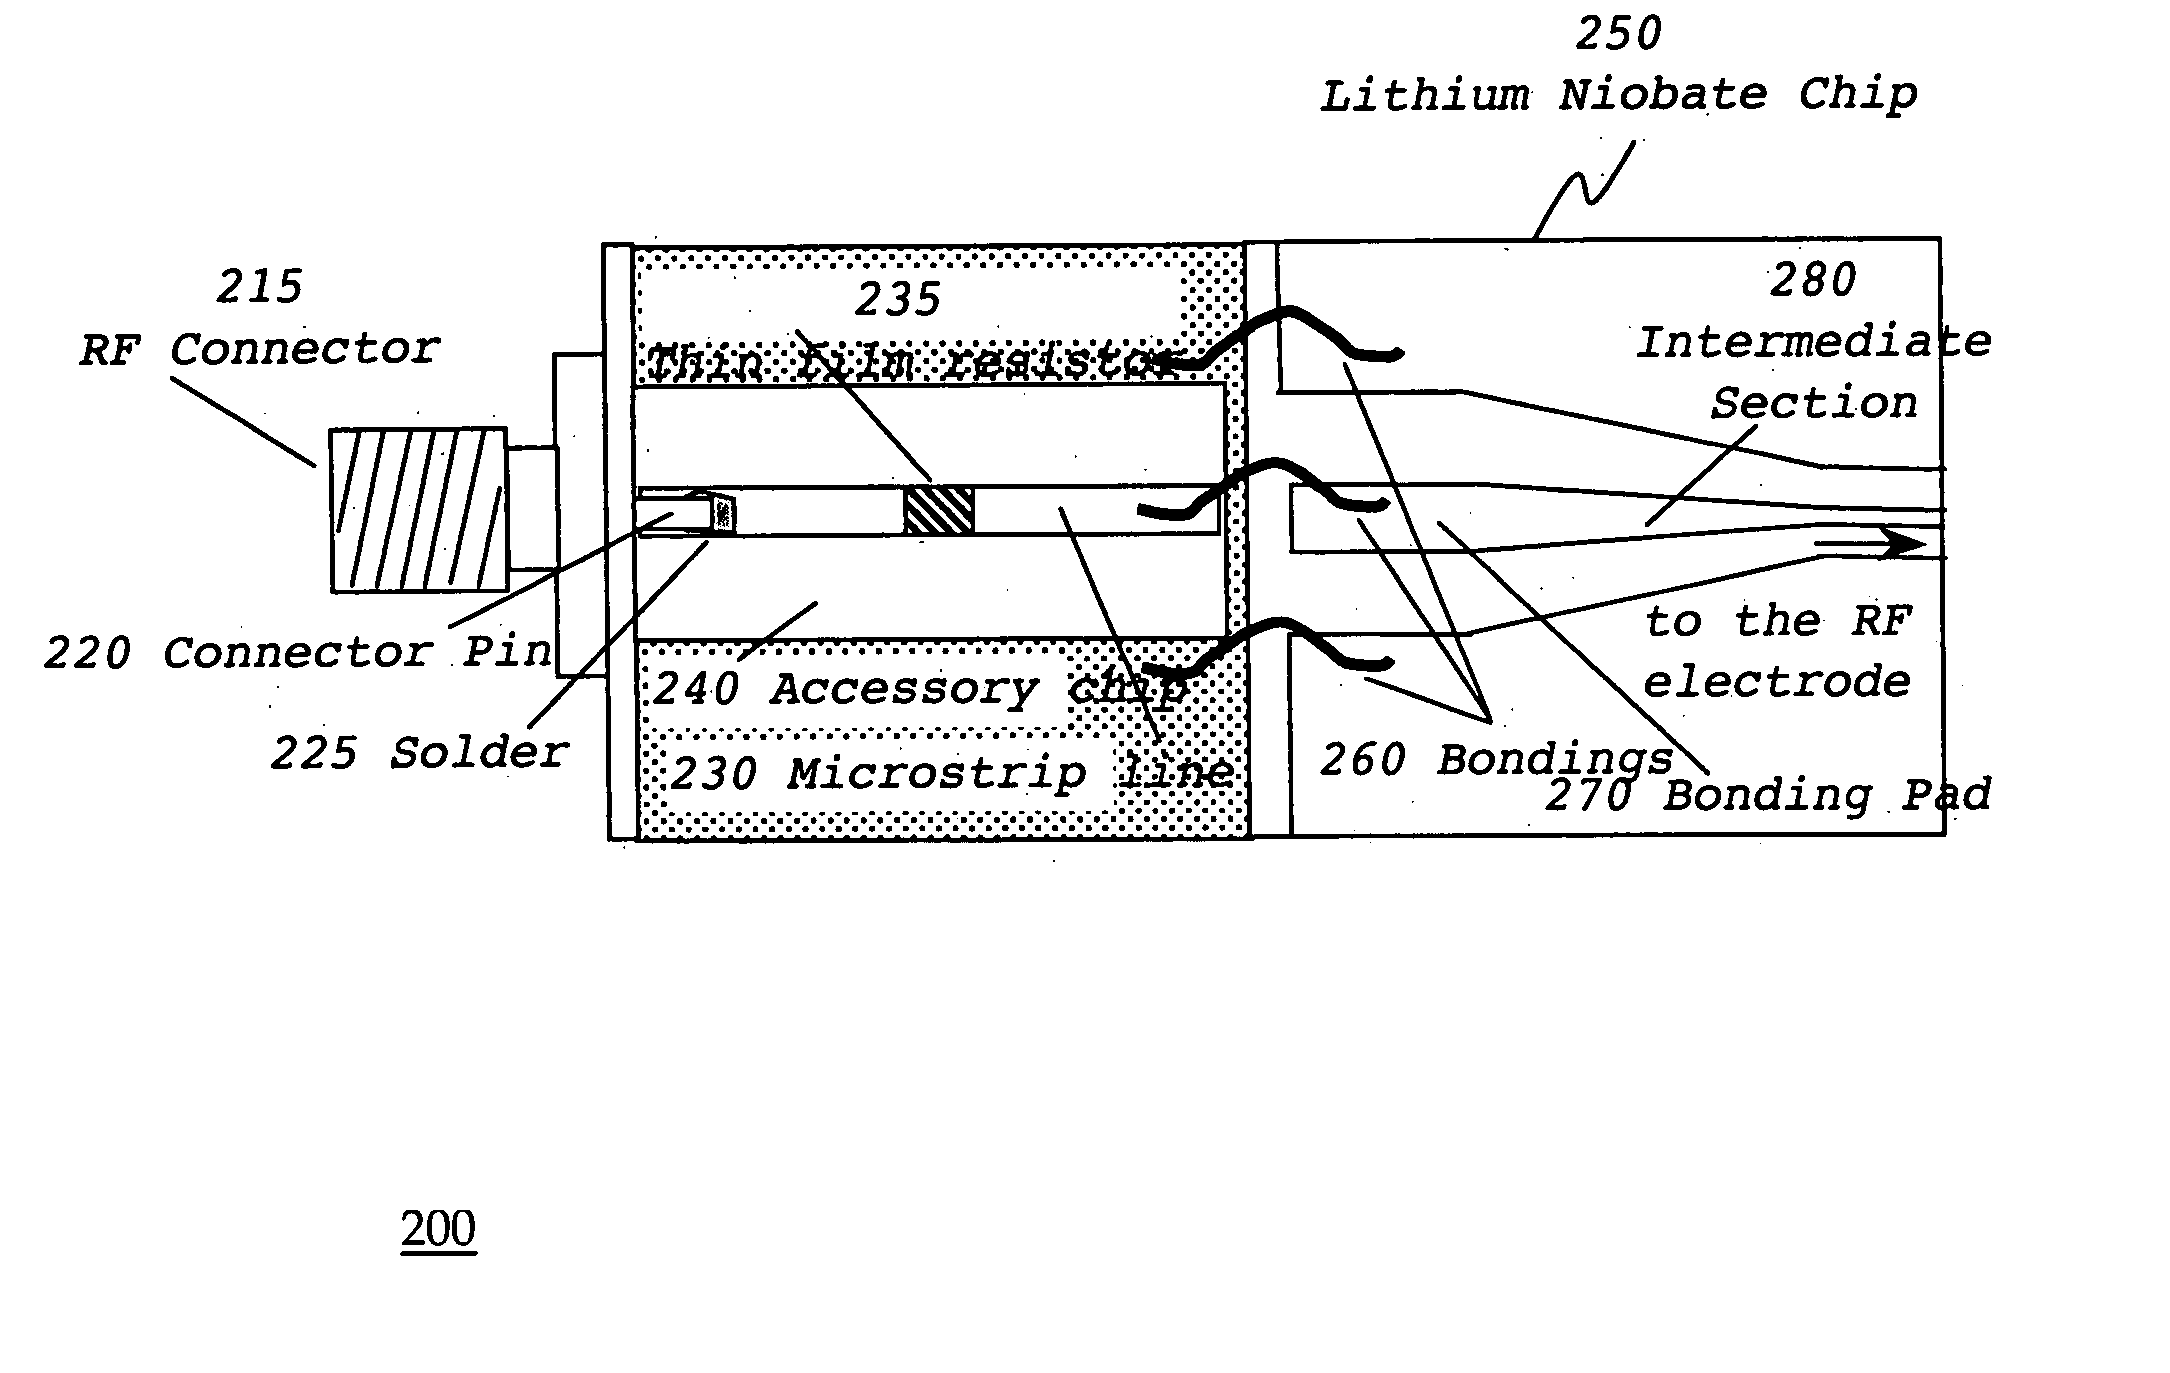 System for reducing the electrical return loss of a lithium niobate traveling wave optical modulator with low characteristic impedance